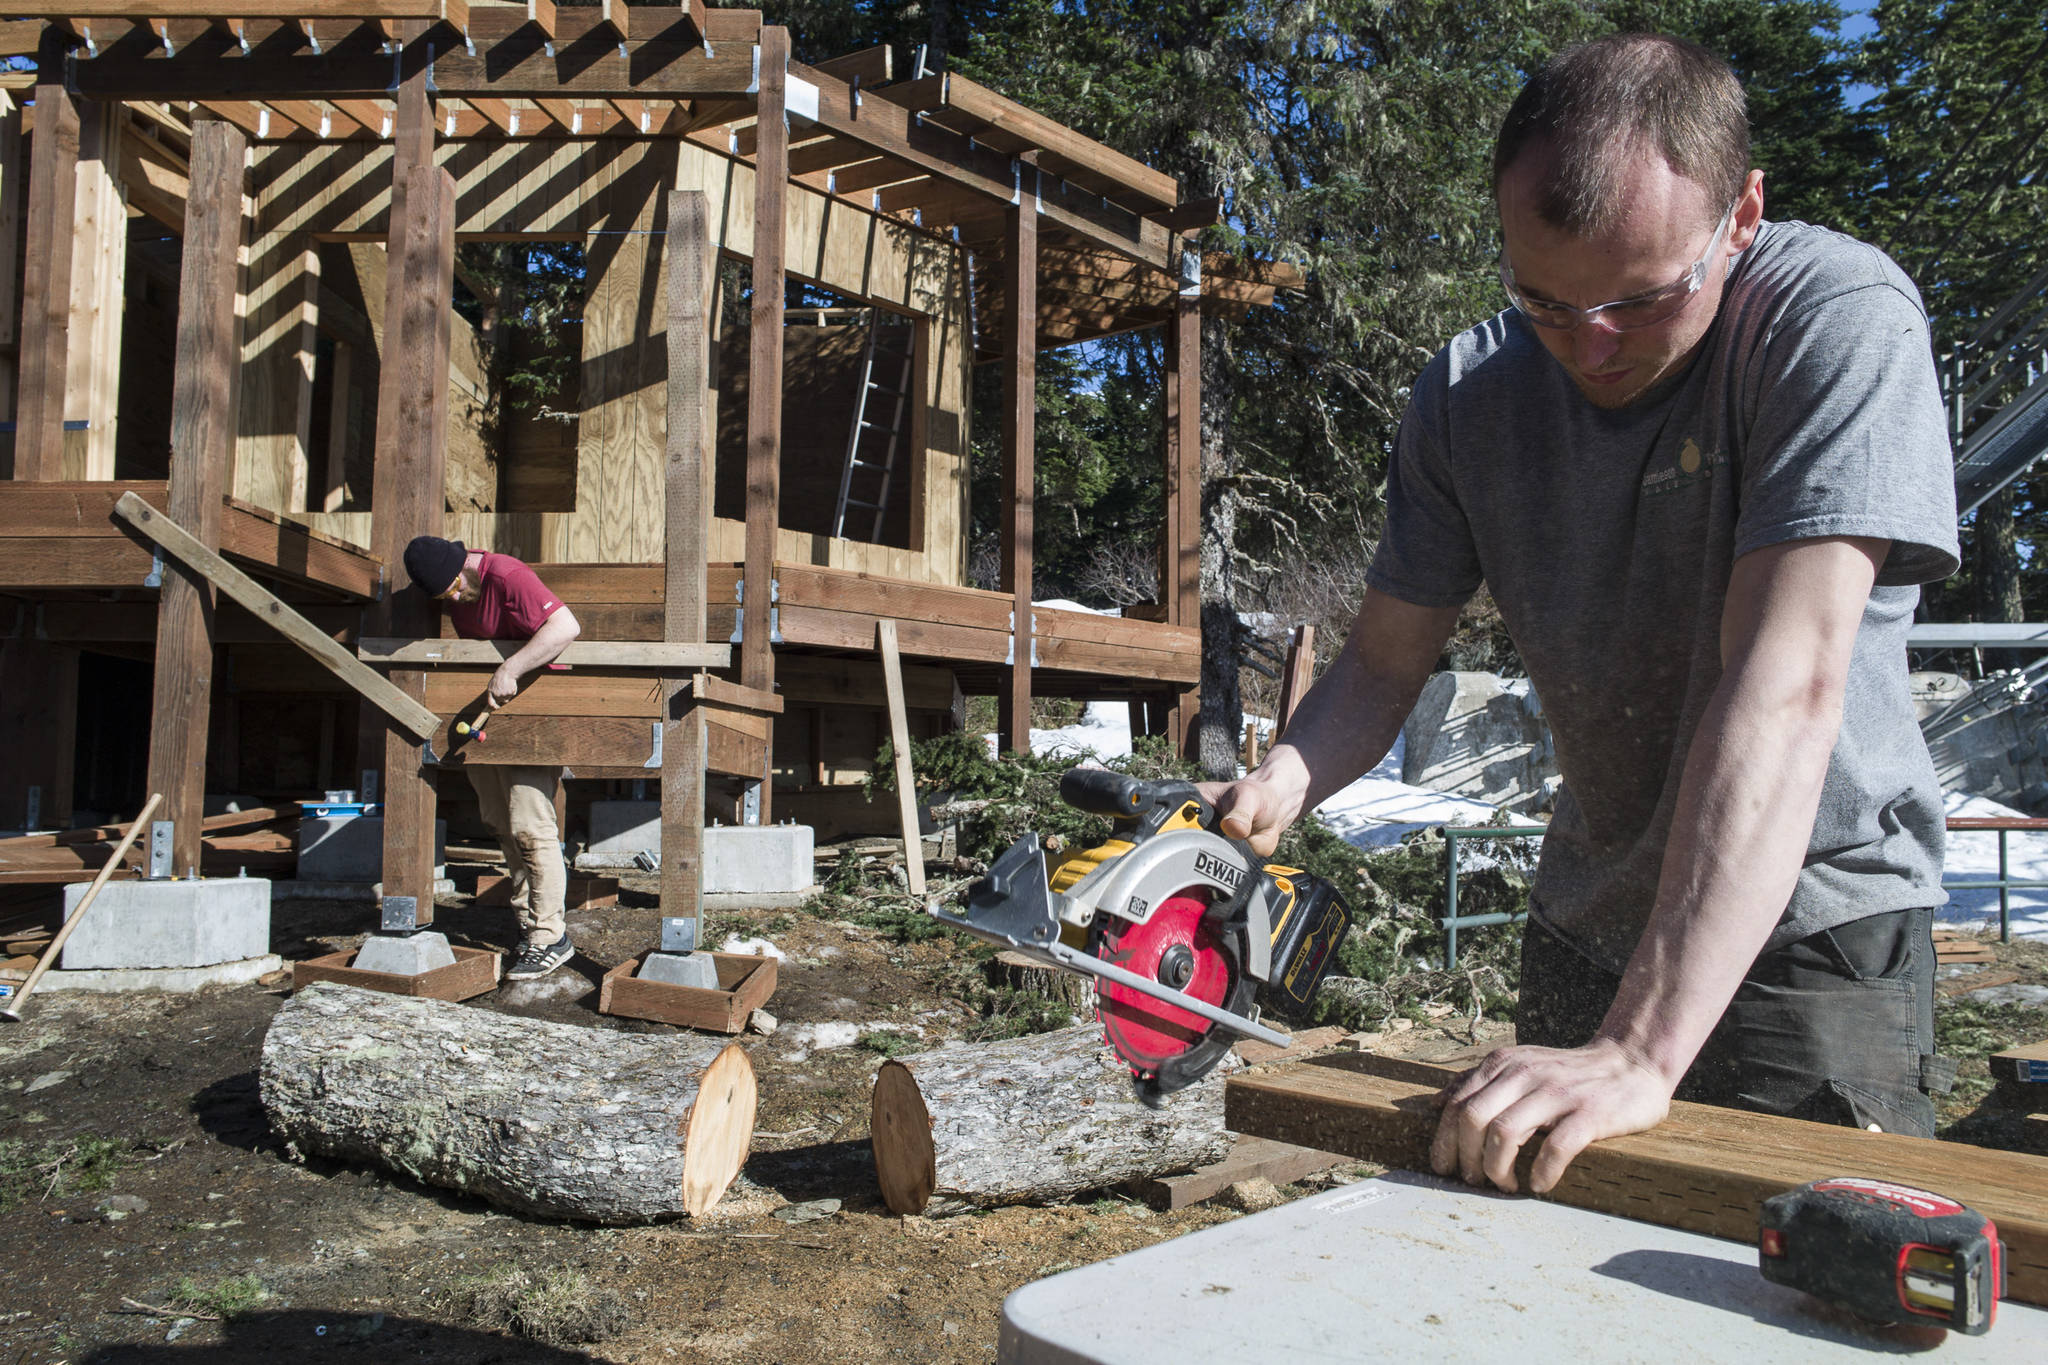 Matthew Kenkle and Joseph Staran, right, of Silverbow Construction, build a new education display for the Juneau Raptor Center on Mount Roberts on Thursday, March 28, 2019. The display will house Lady Baltimore, an adult bald eagle that is not releasable back to the wild. (Michael Penn | Juneau Empire)